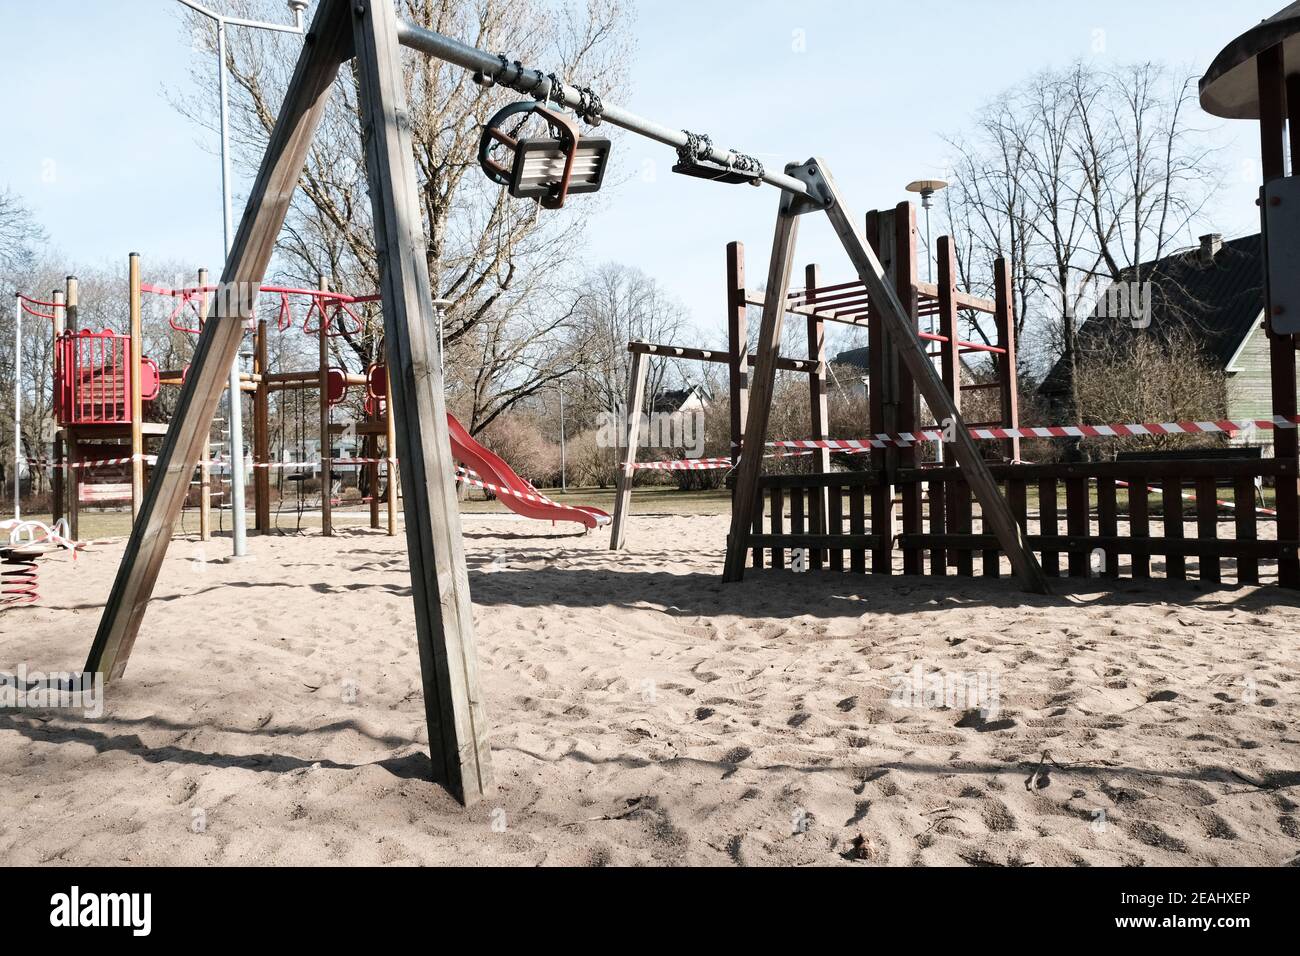 Restricted playground in a city park during COVID-19 lockdown. Stock Photo